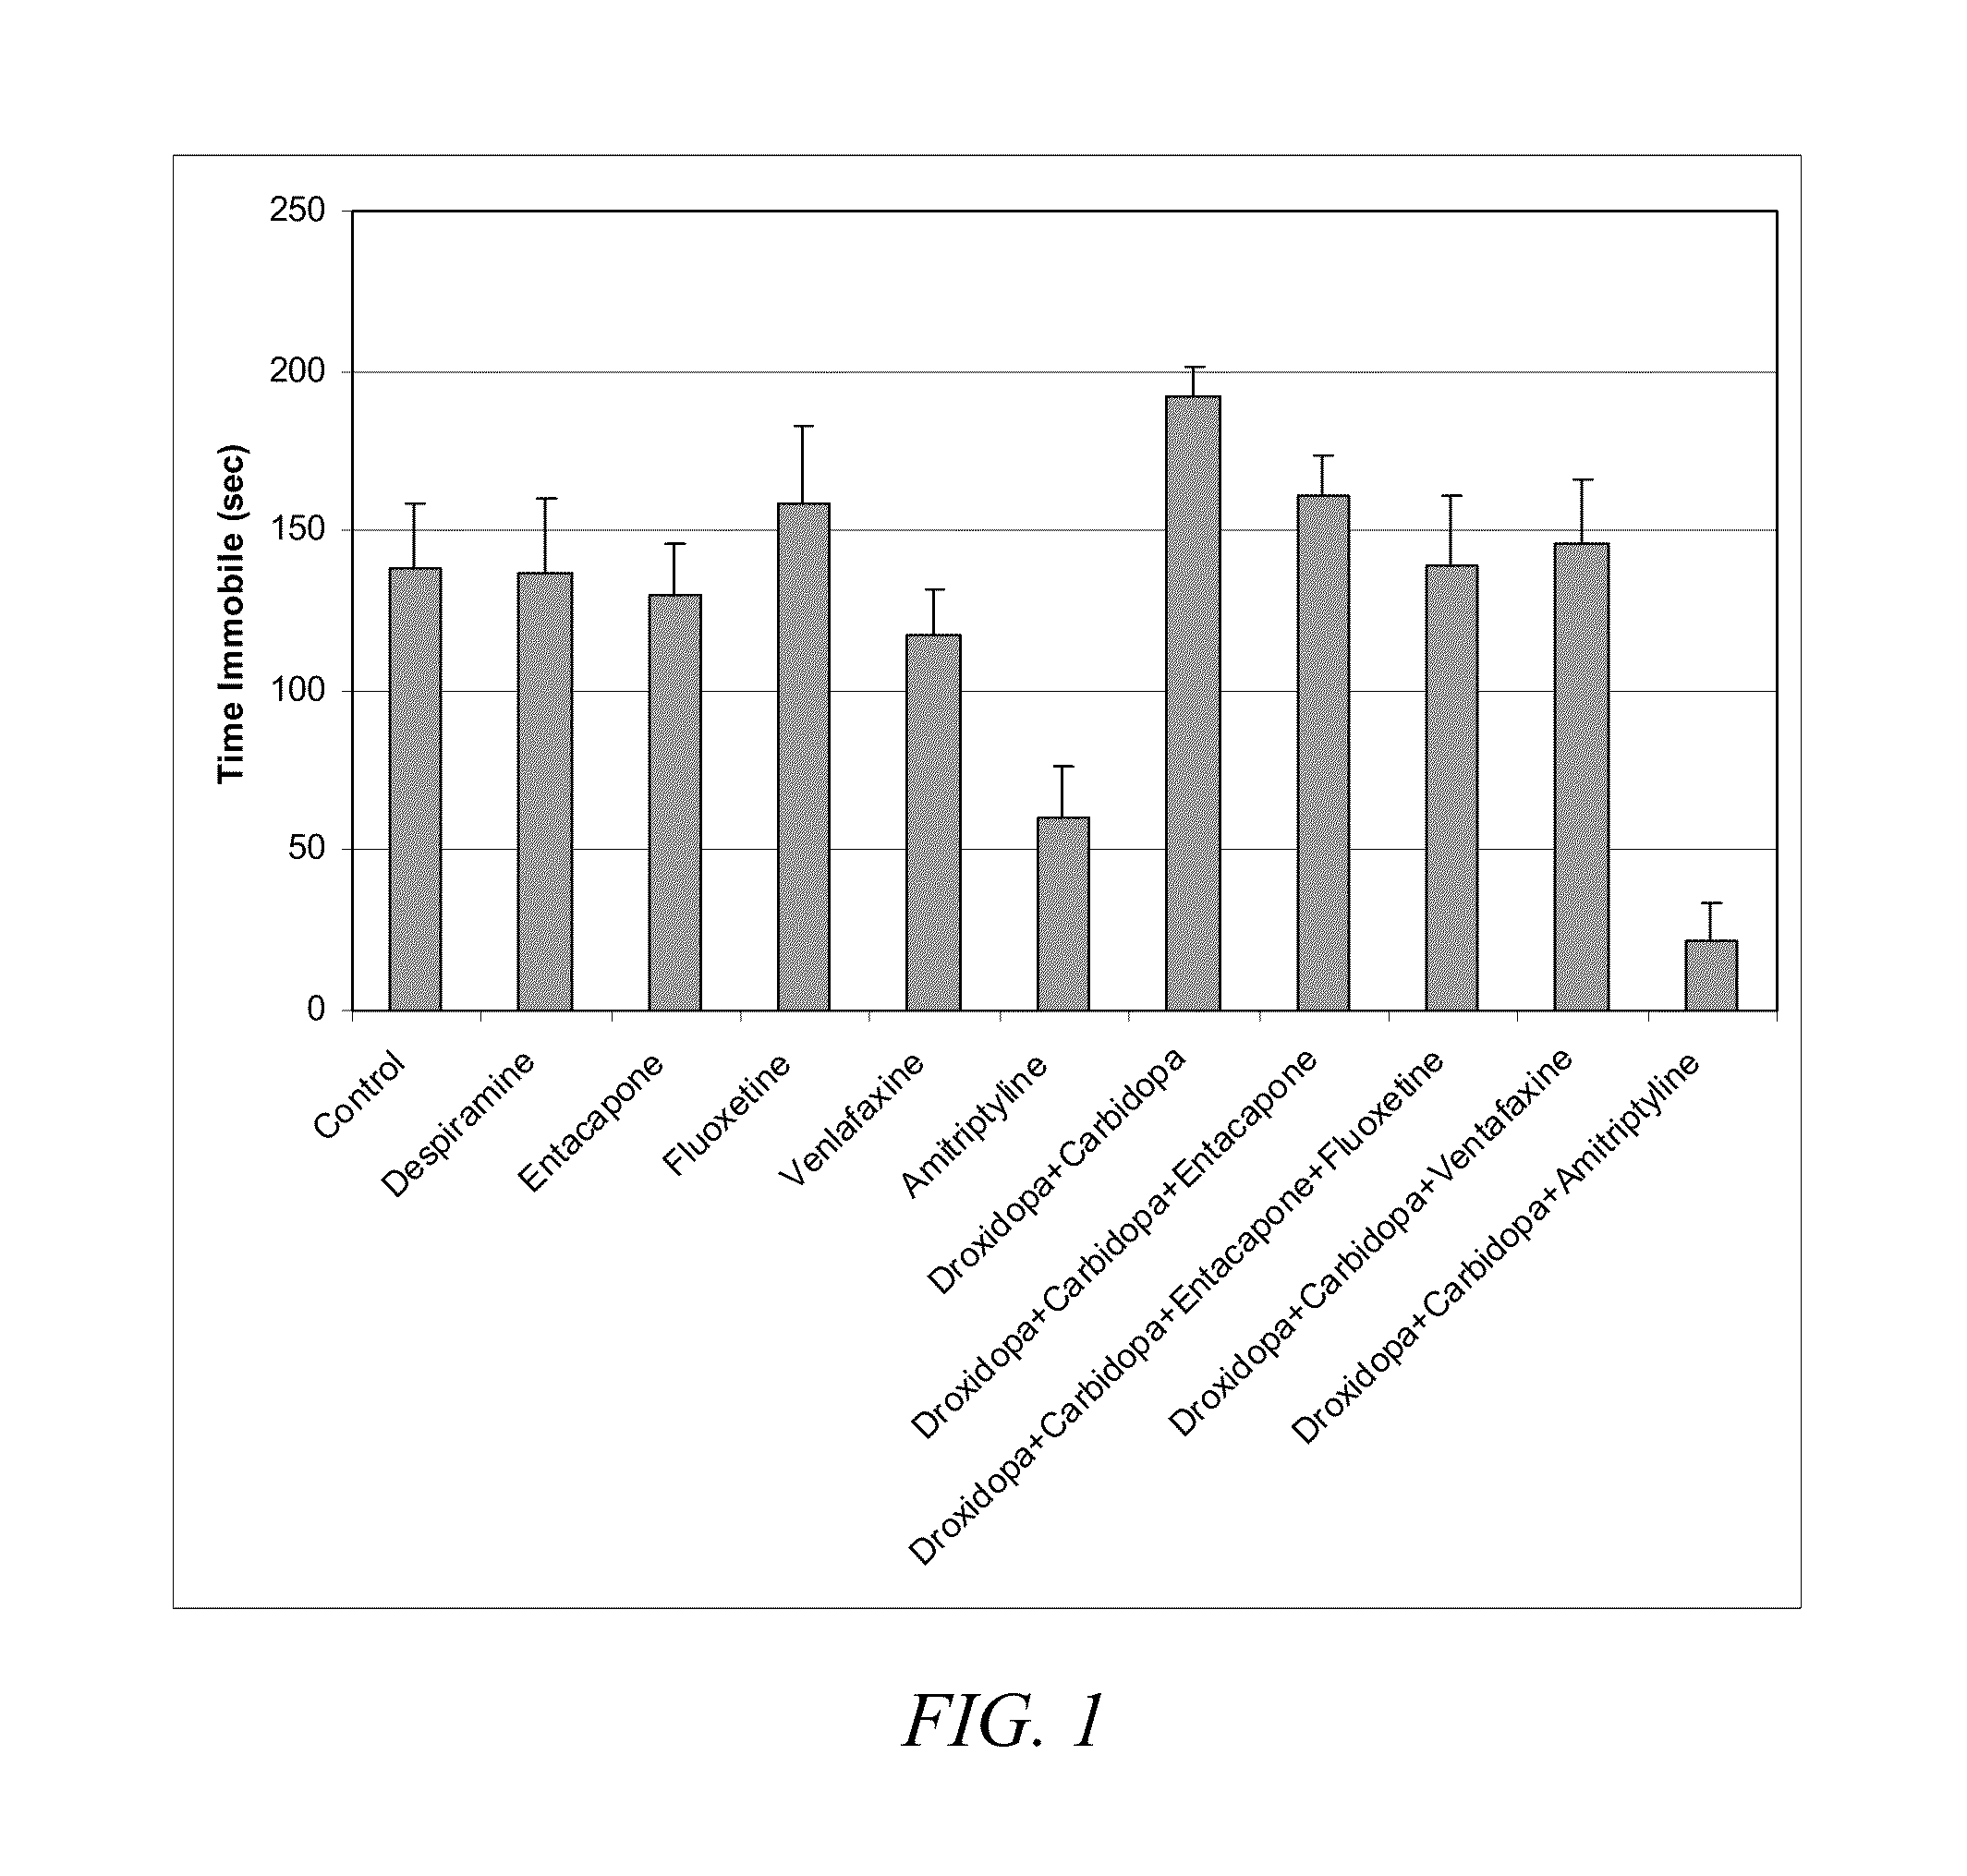 Droxidopa and pharmaceutical composition thereof for the treatment of mood disorders, sleep disorders, or attention deficit disorders